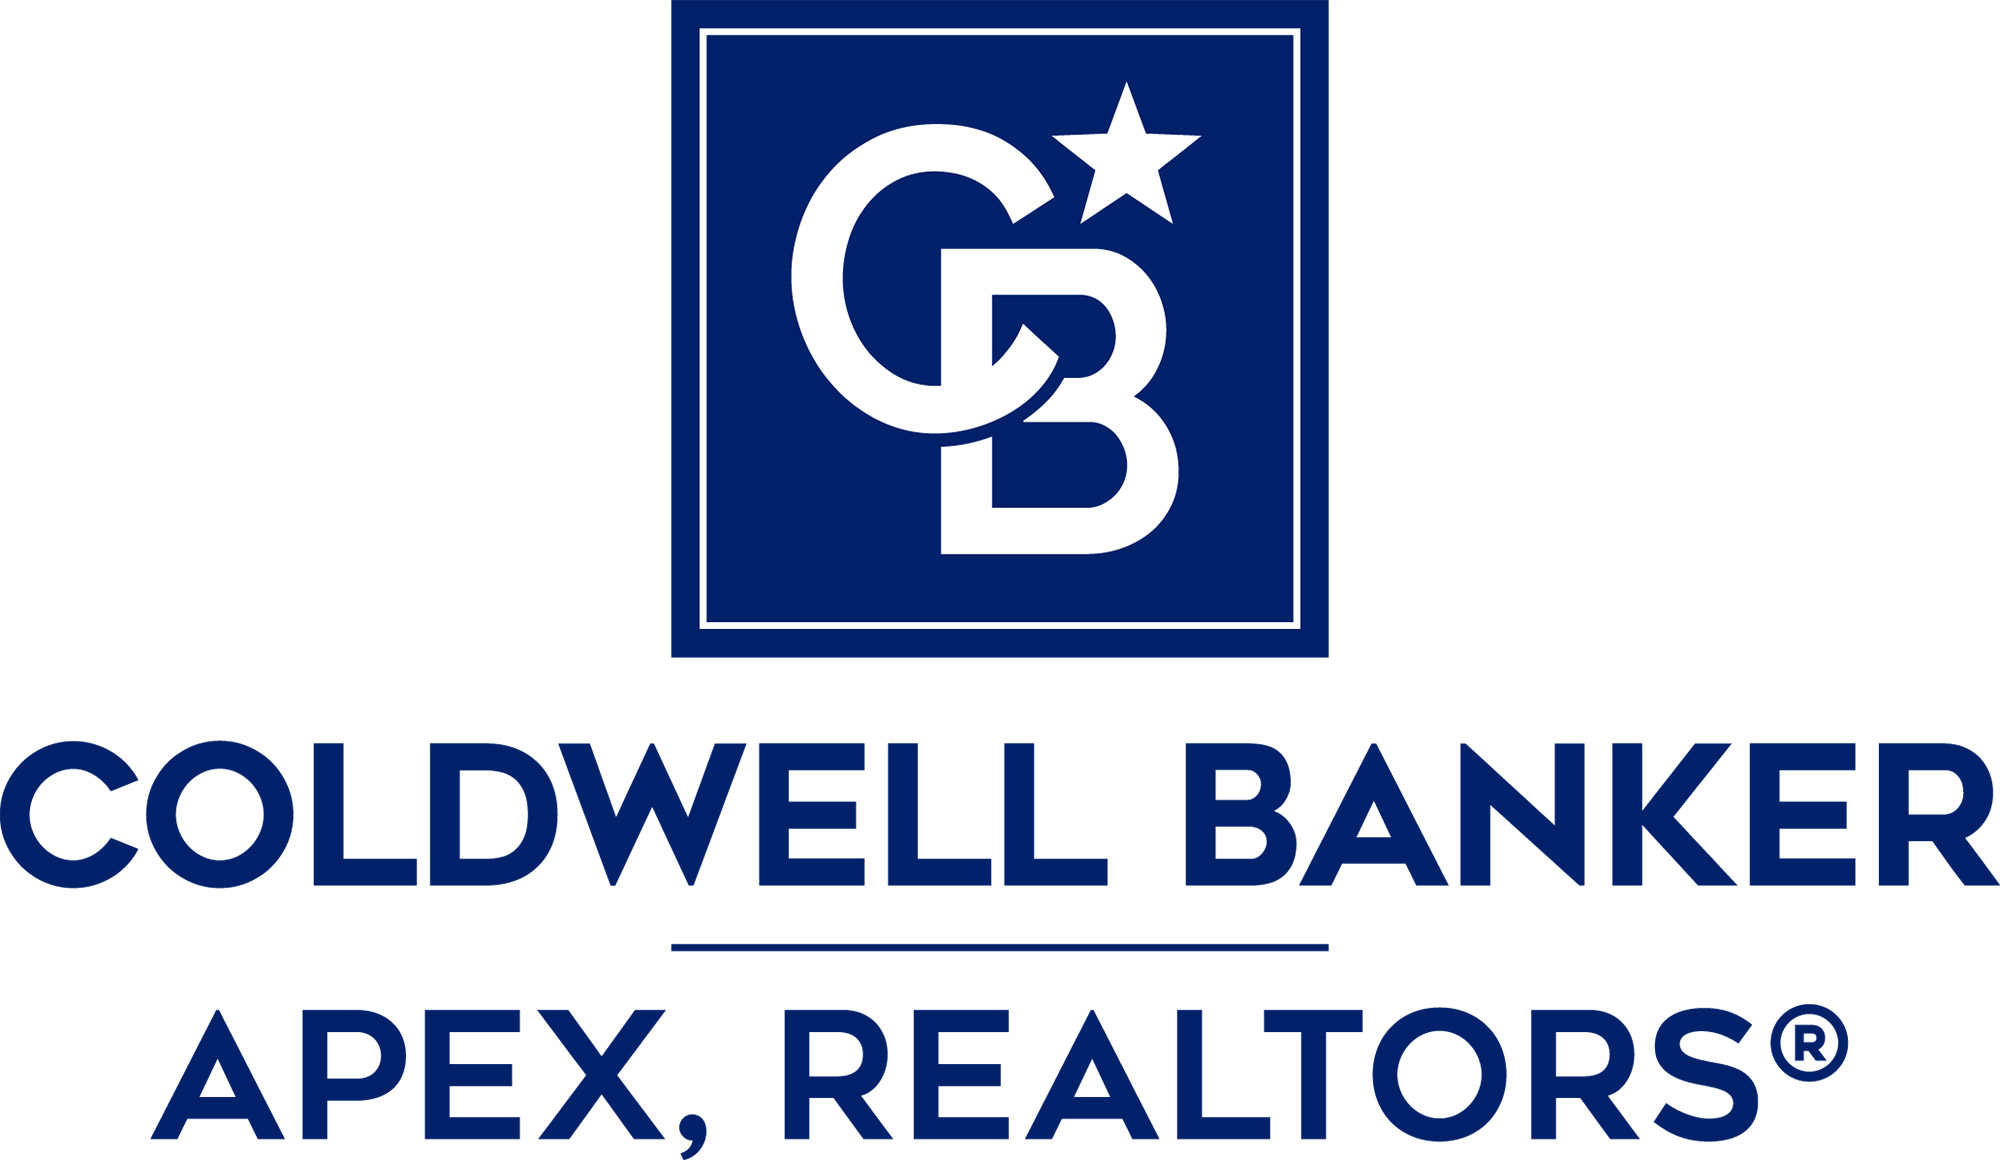 Cherry Ruffino - Coldwell Banker AG Town Logo